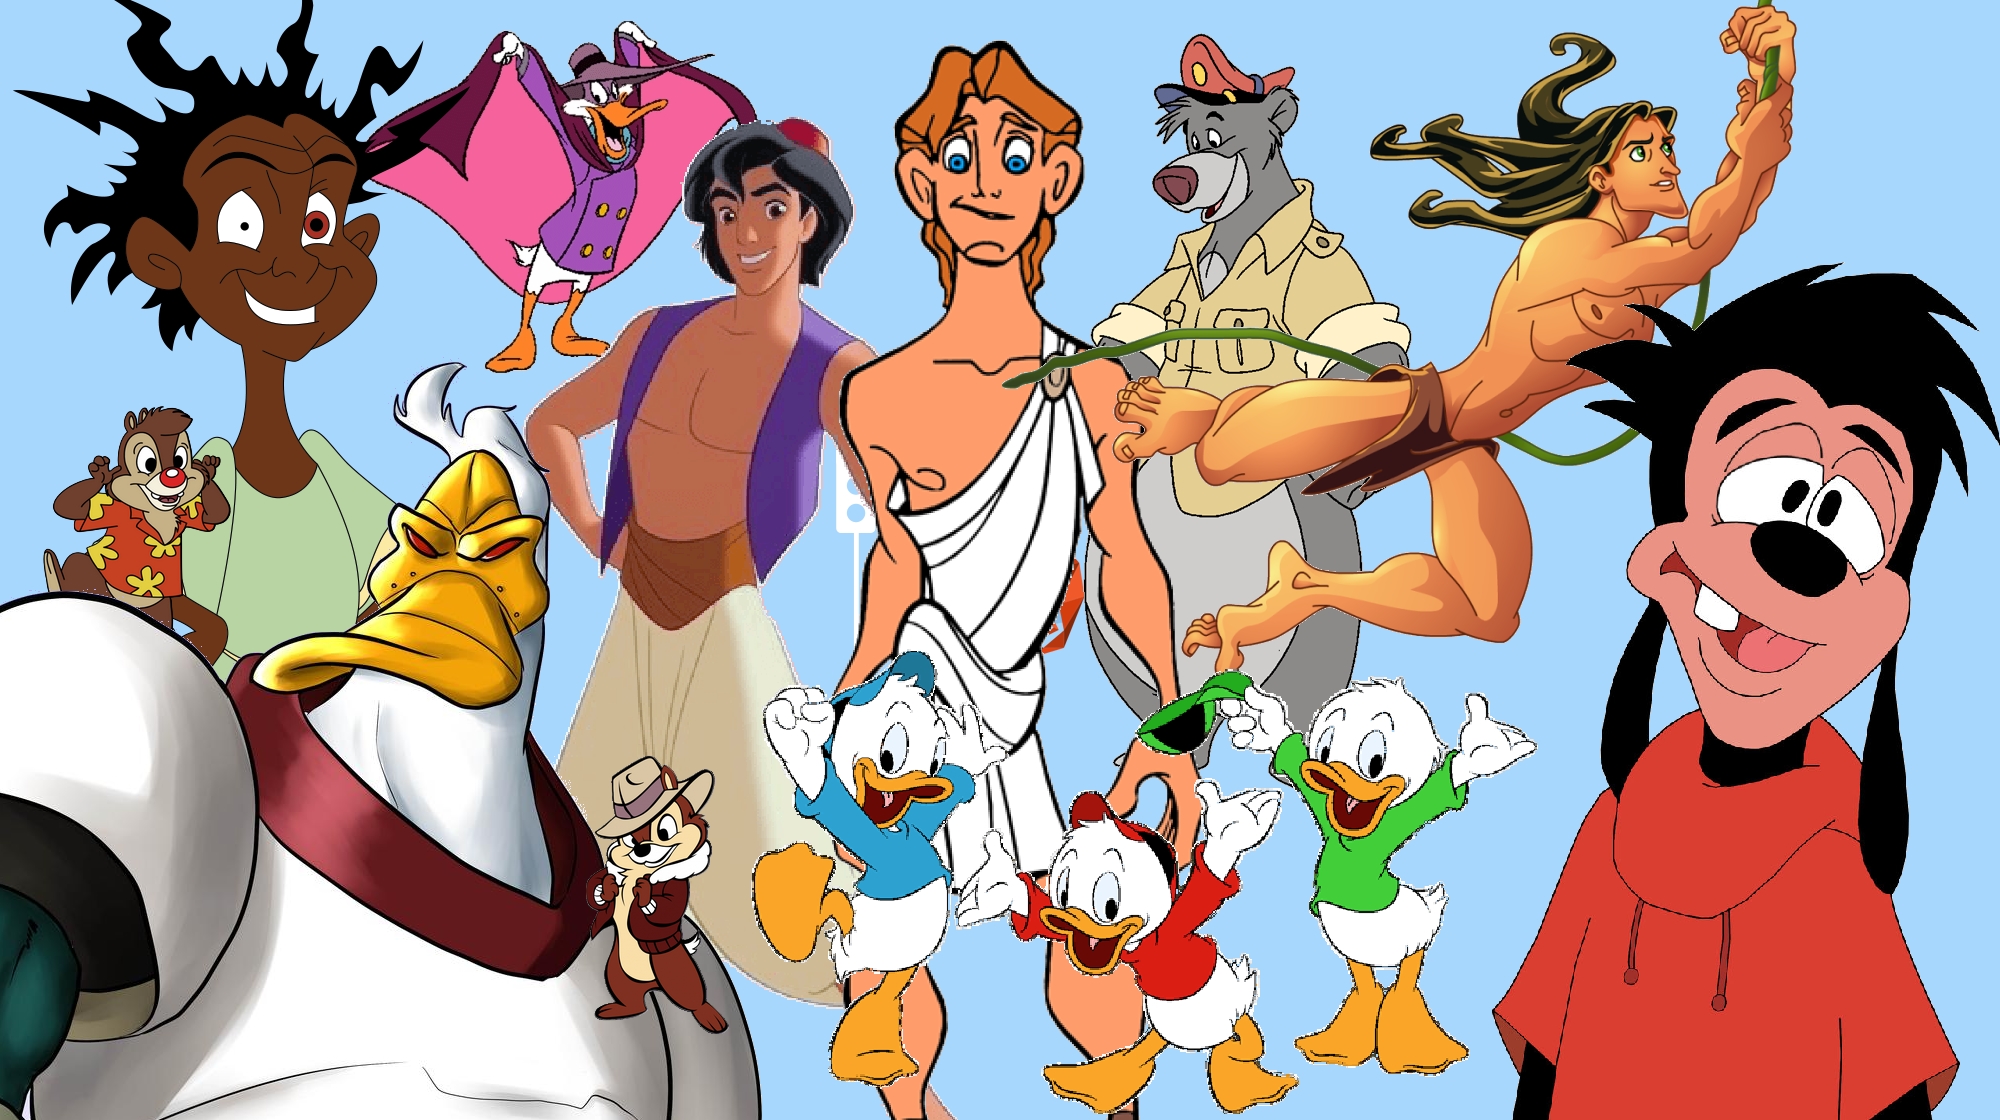 Disney personnage masculin